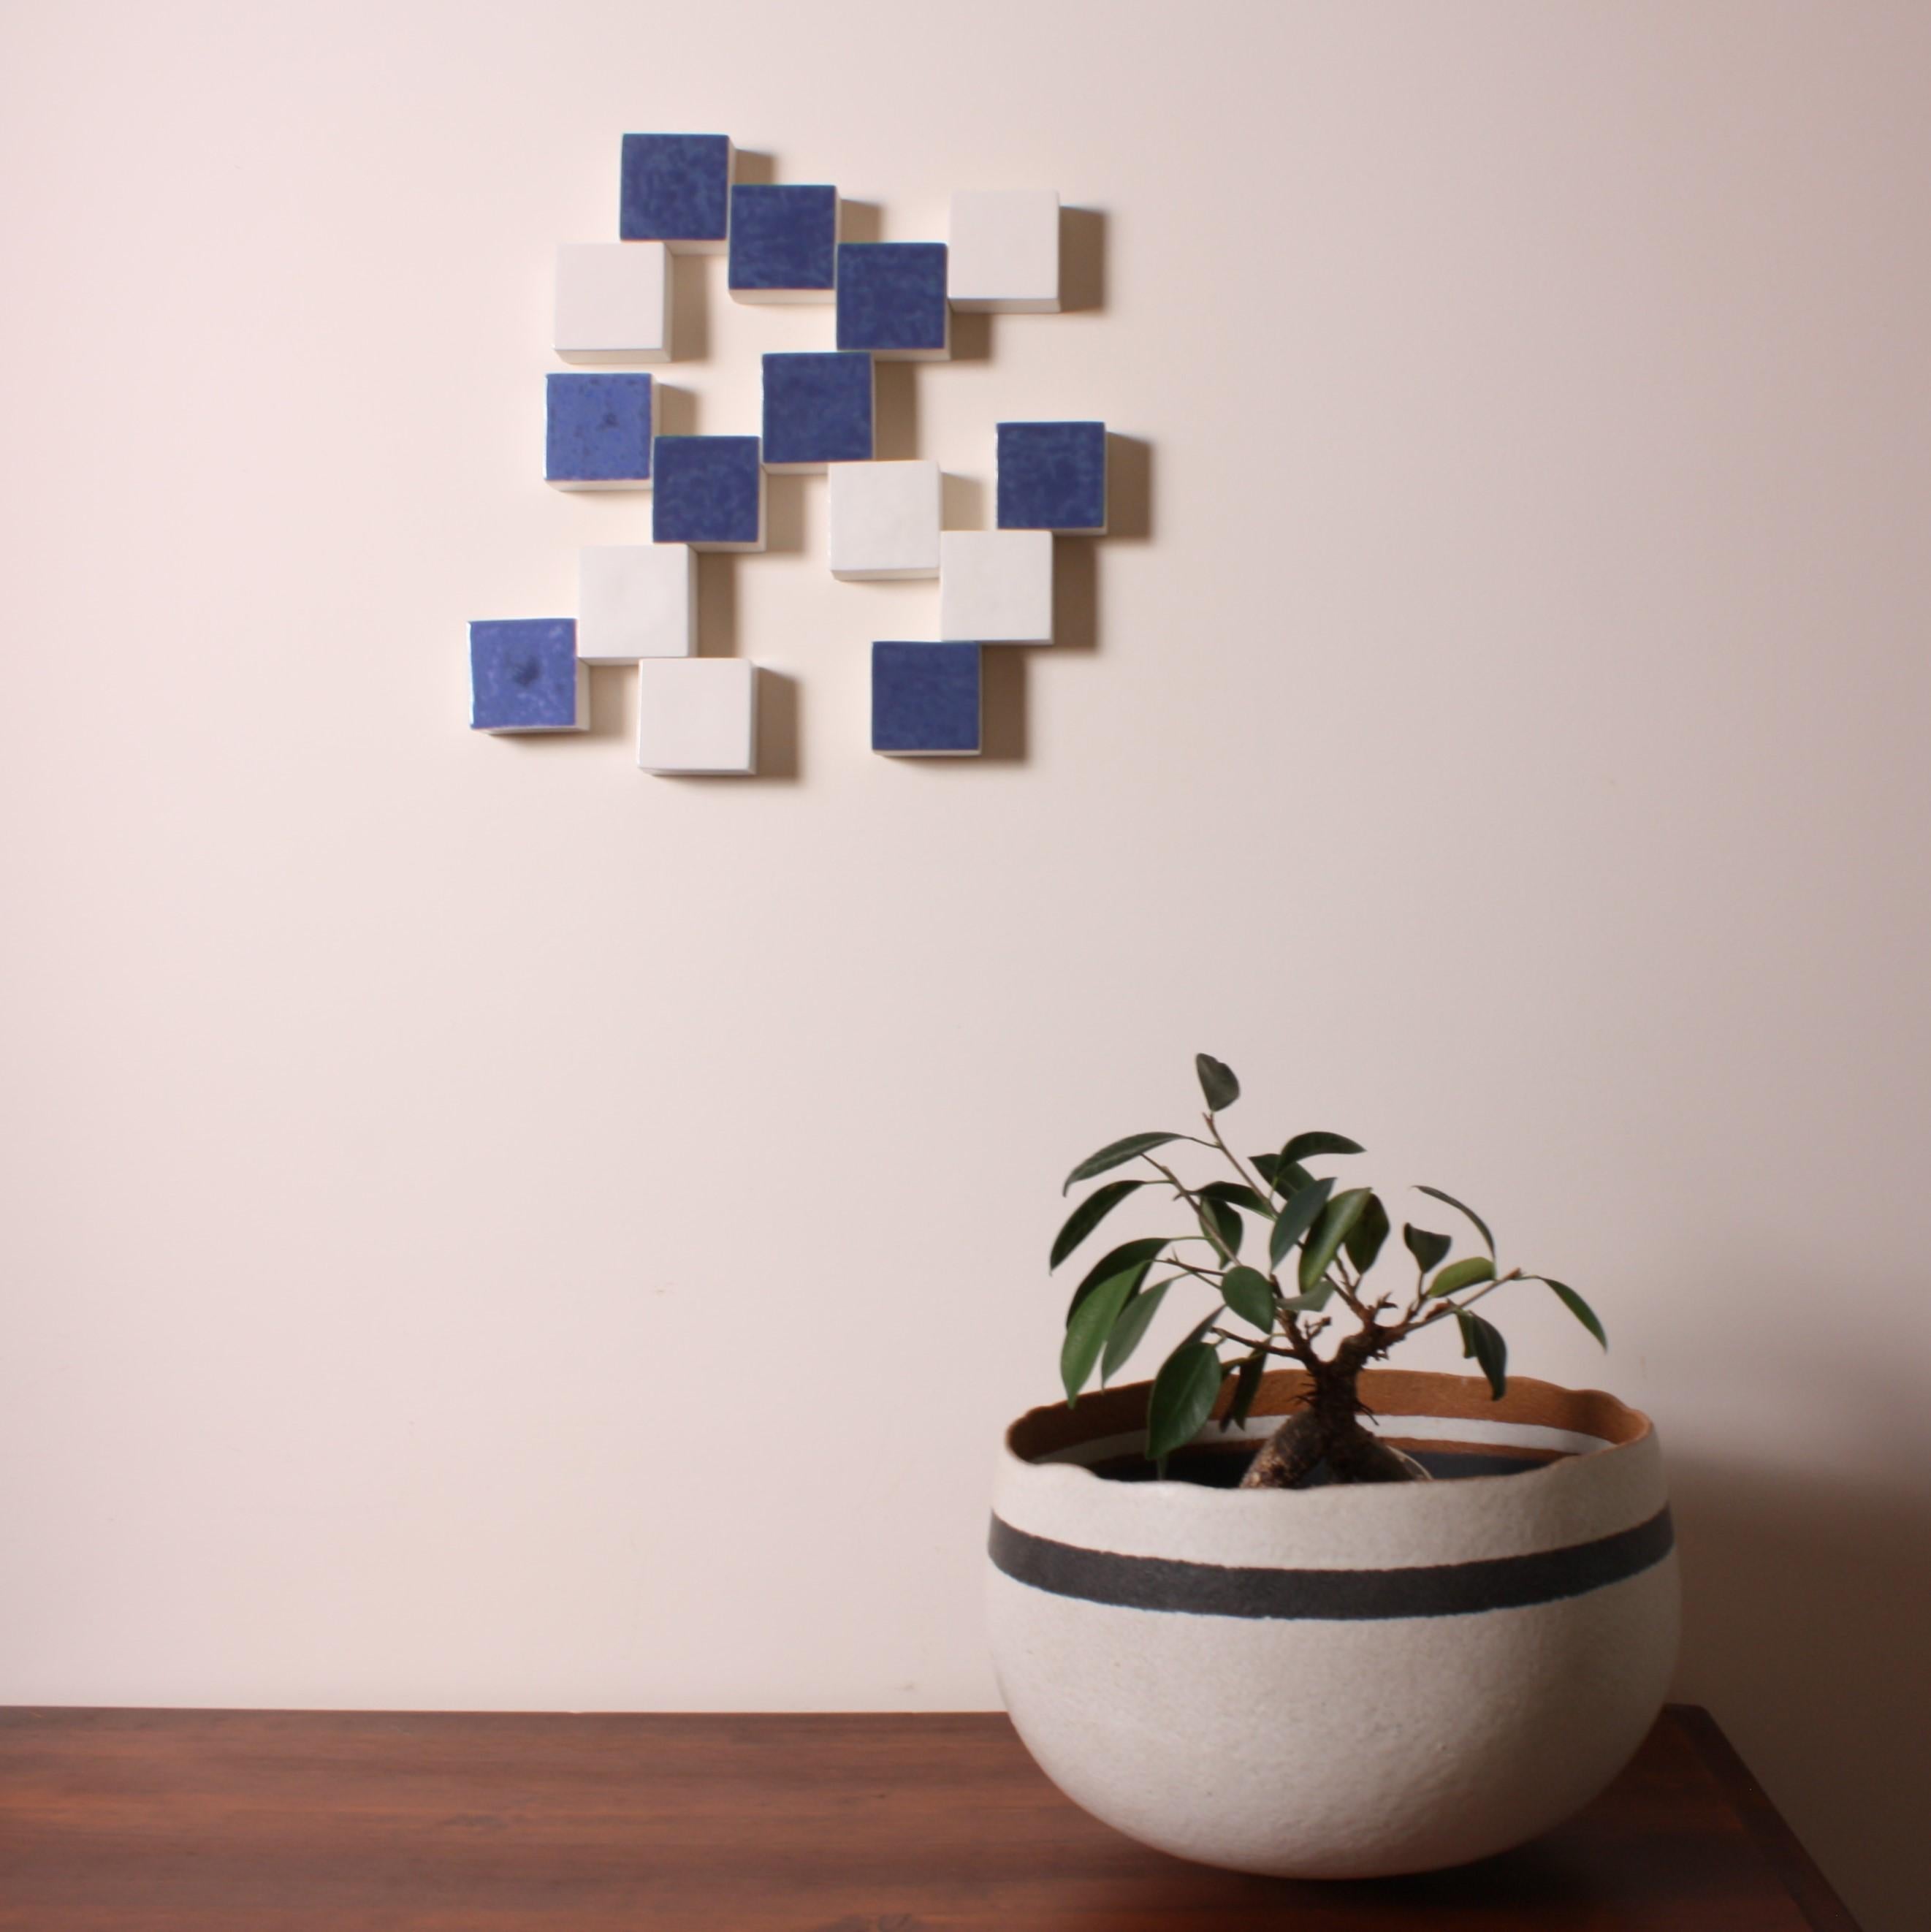 Composition of handmade blue and white cubic porcelain elements assembled into a unique wall mural. The various colors and textures of each surface, in porcelain matte or in glossy or satin enamel, make the piece